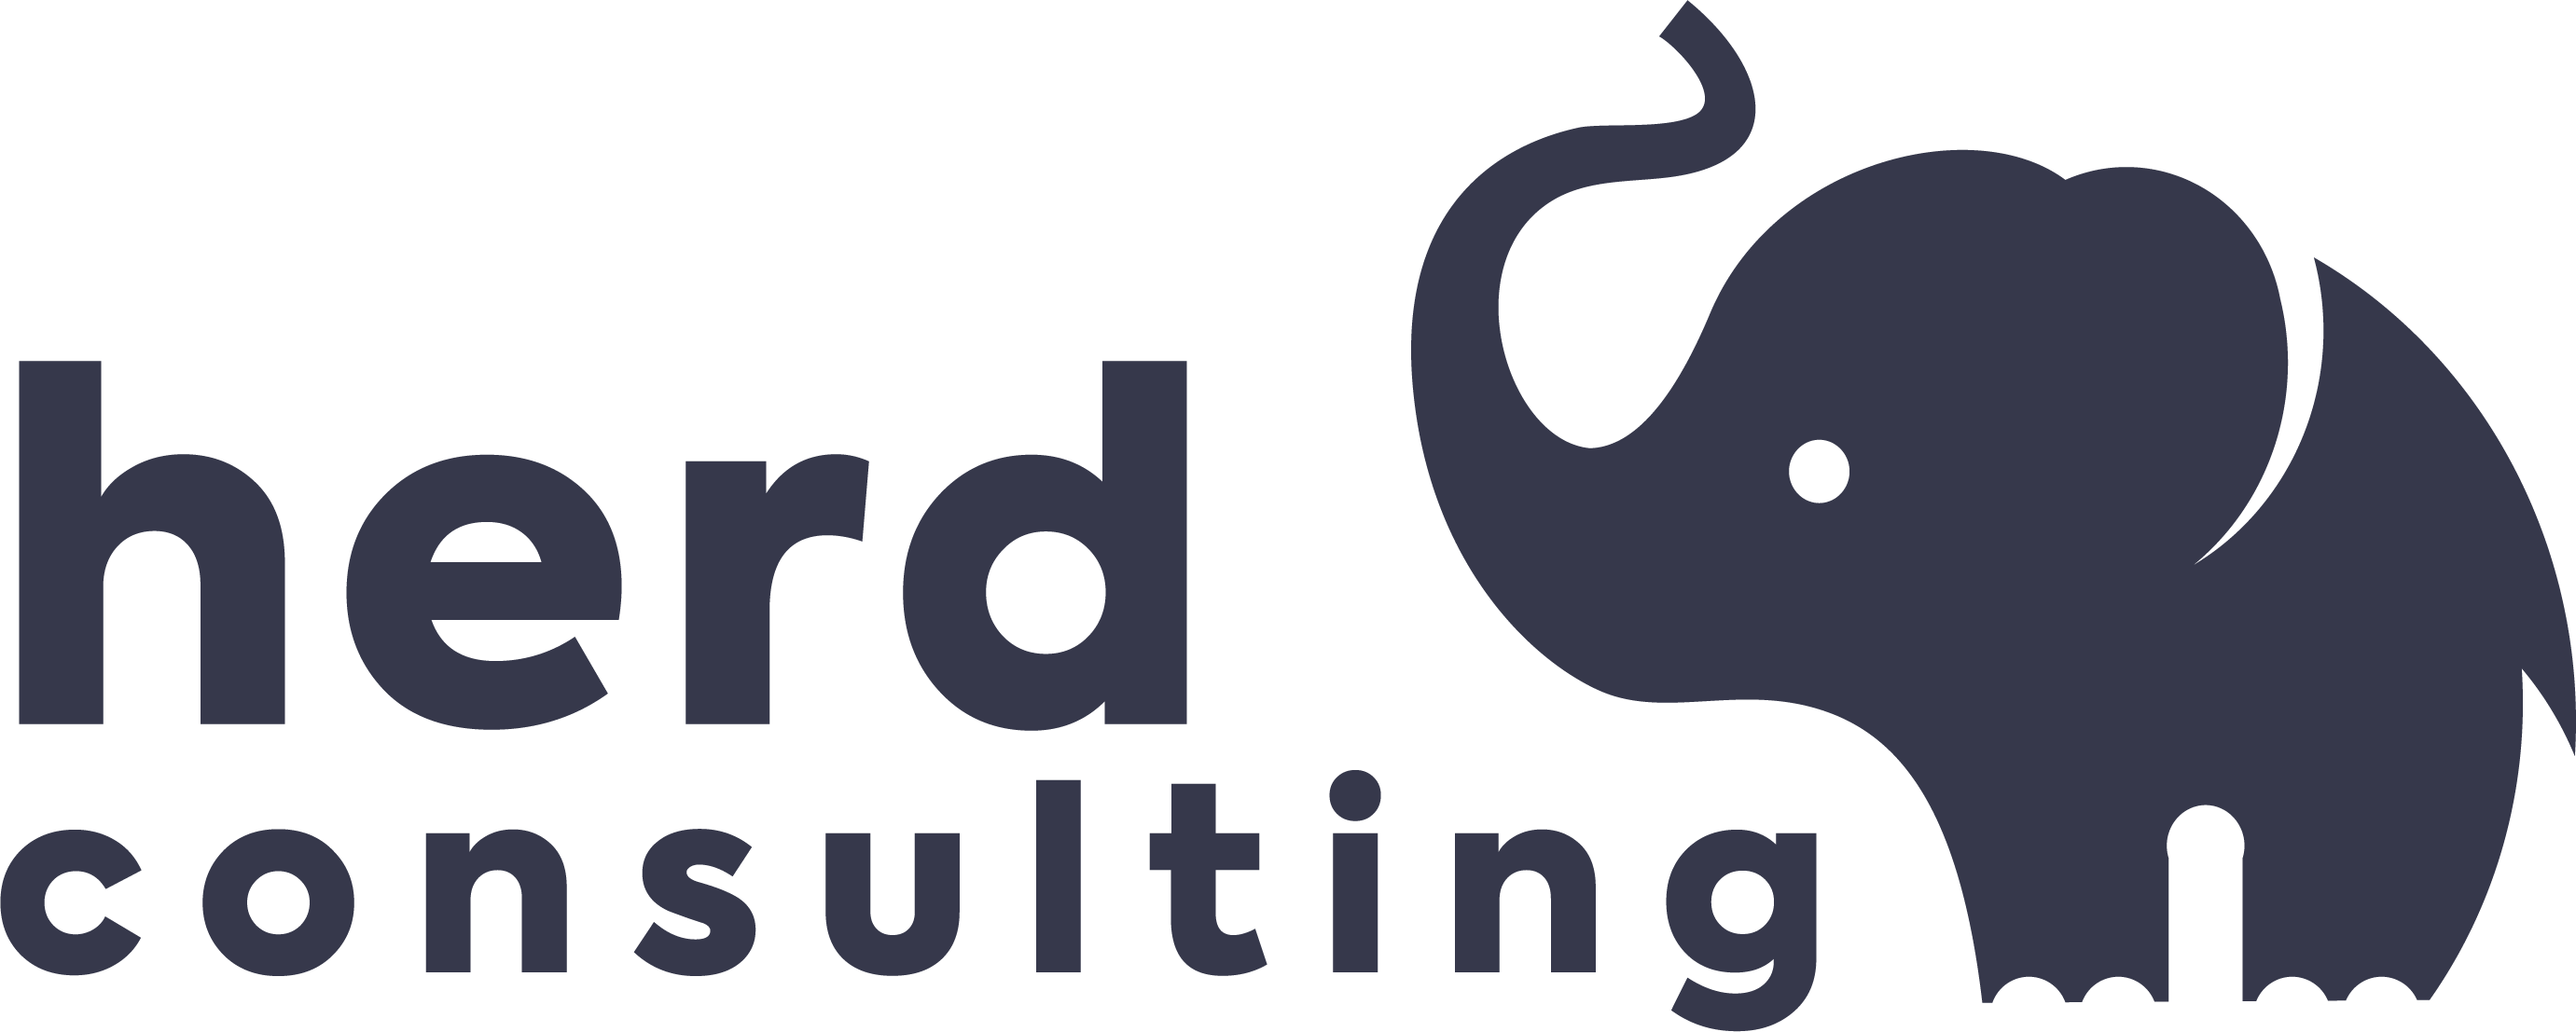 Herd Consulting logo with their signature elephant mascot, in Navy blue